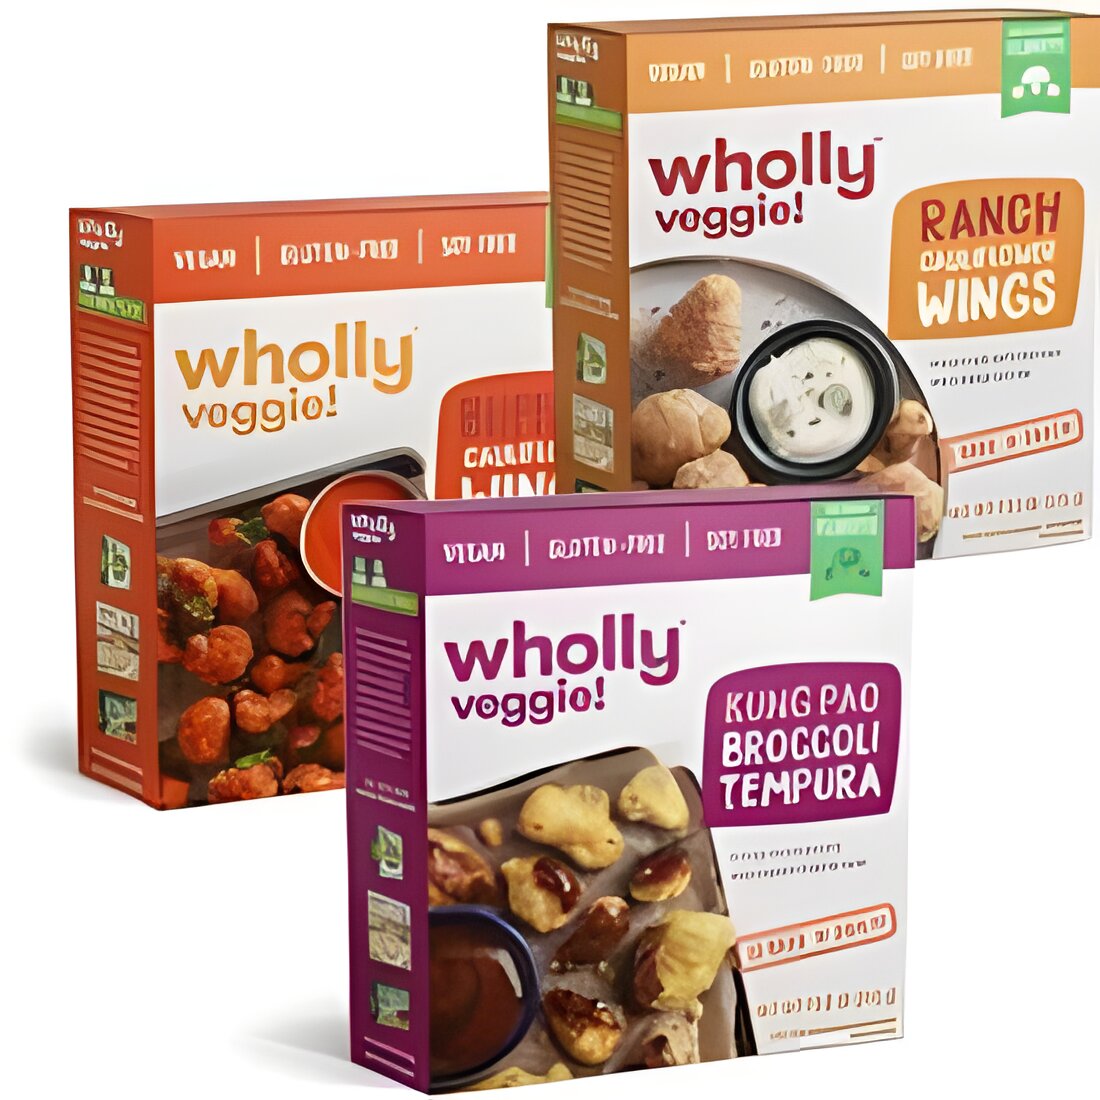 Free Wholly Veggie's Plant-based Wings